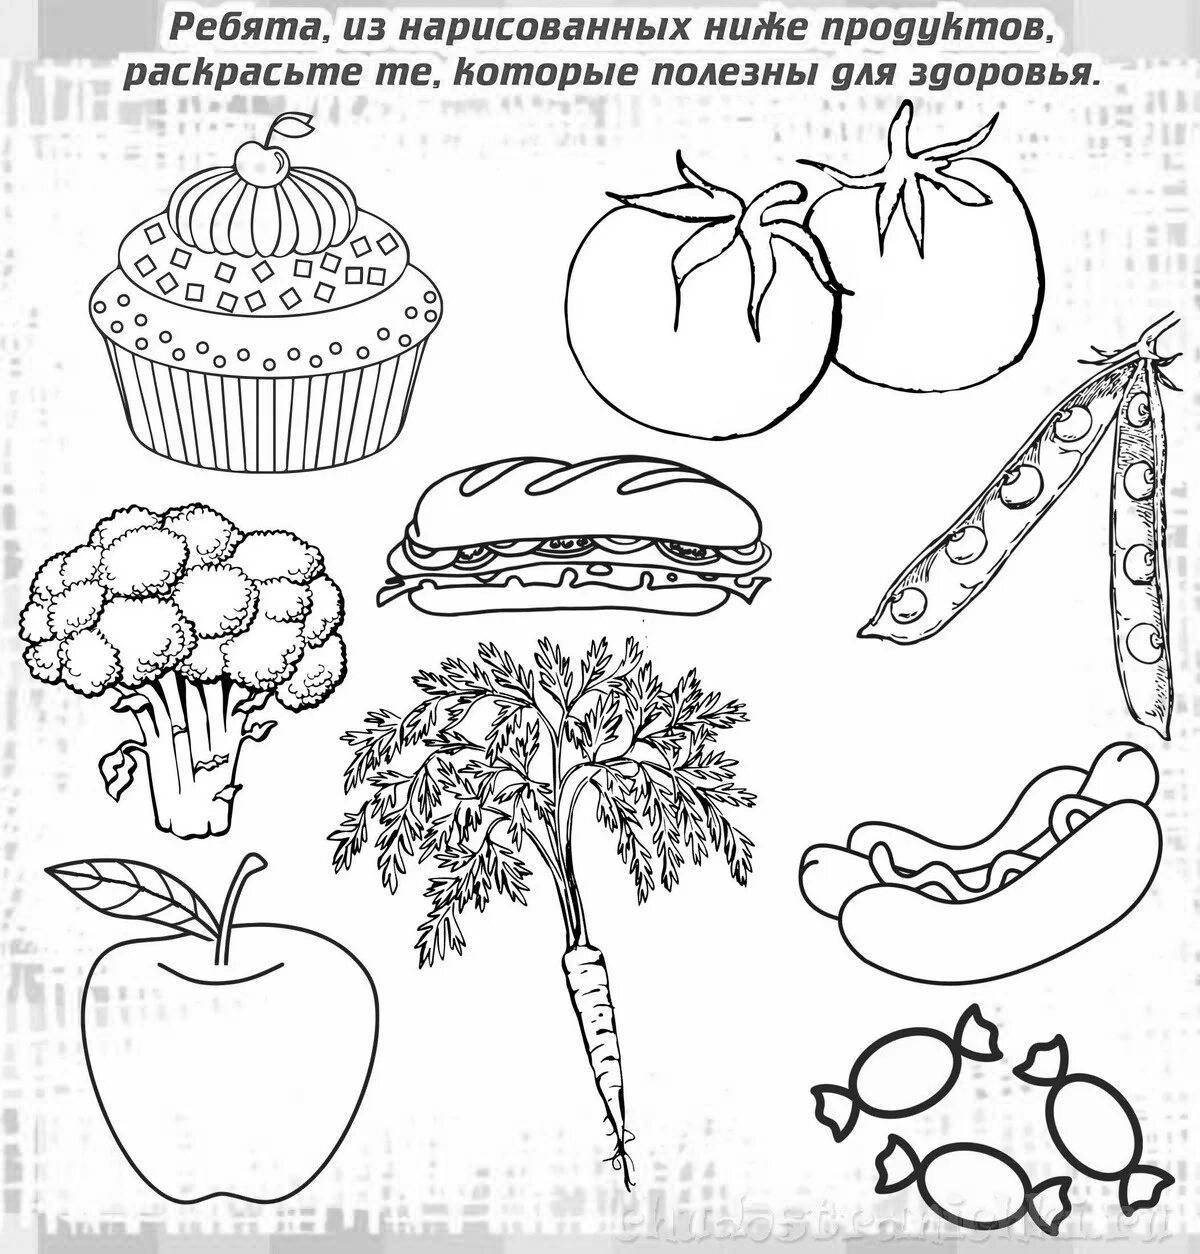 Colorful food coloring pages for children aged 6-7